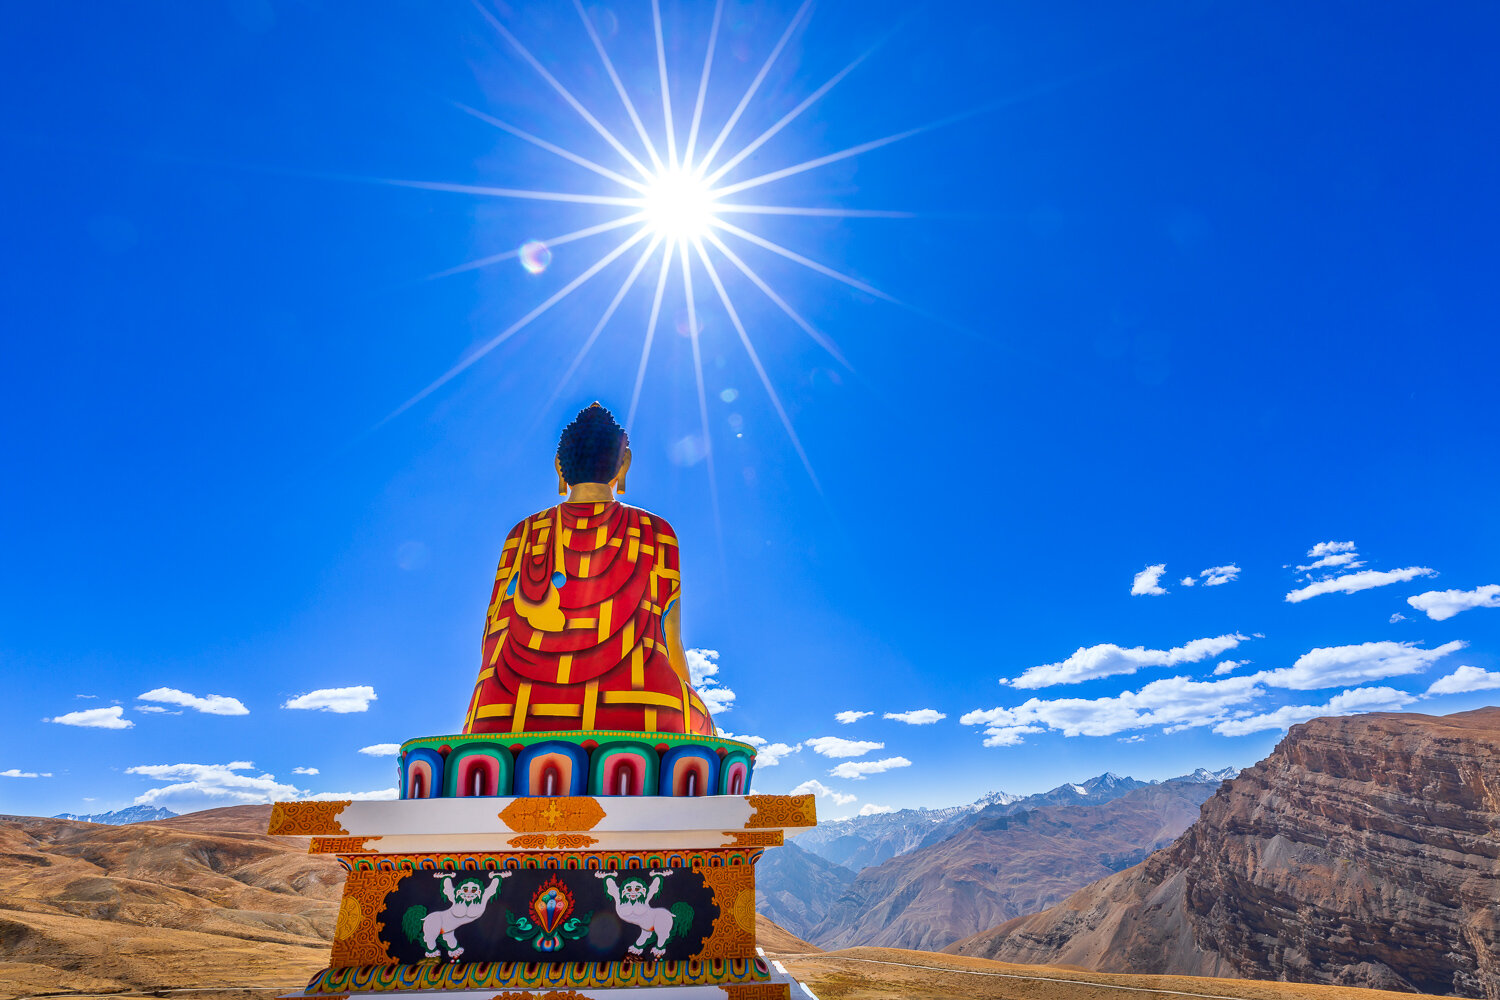 gient buddha statue at lagnza in spiti valley by prathamesh dixit.jpg